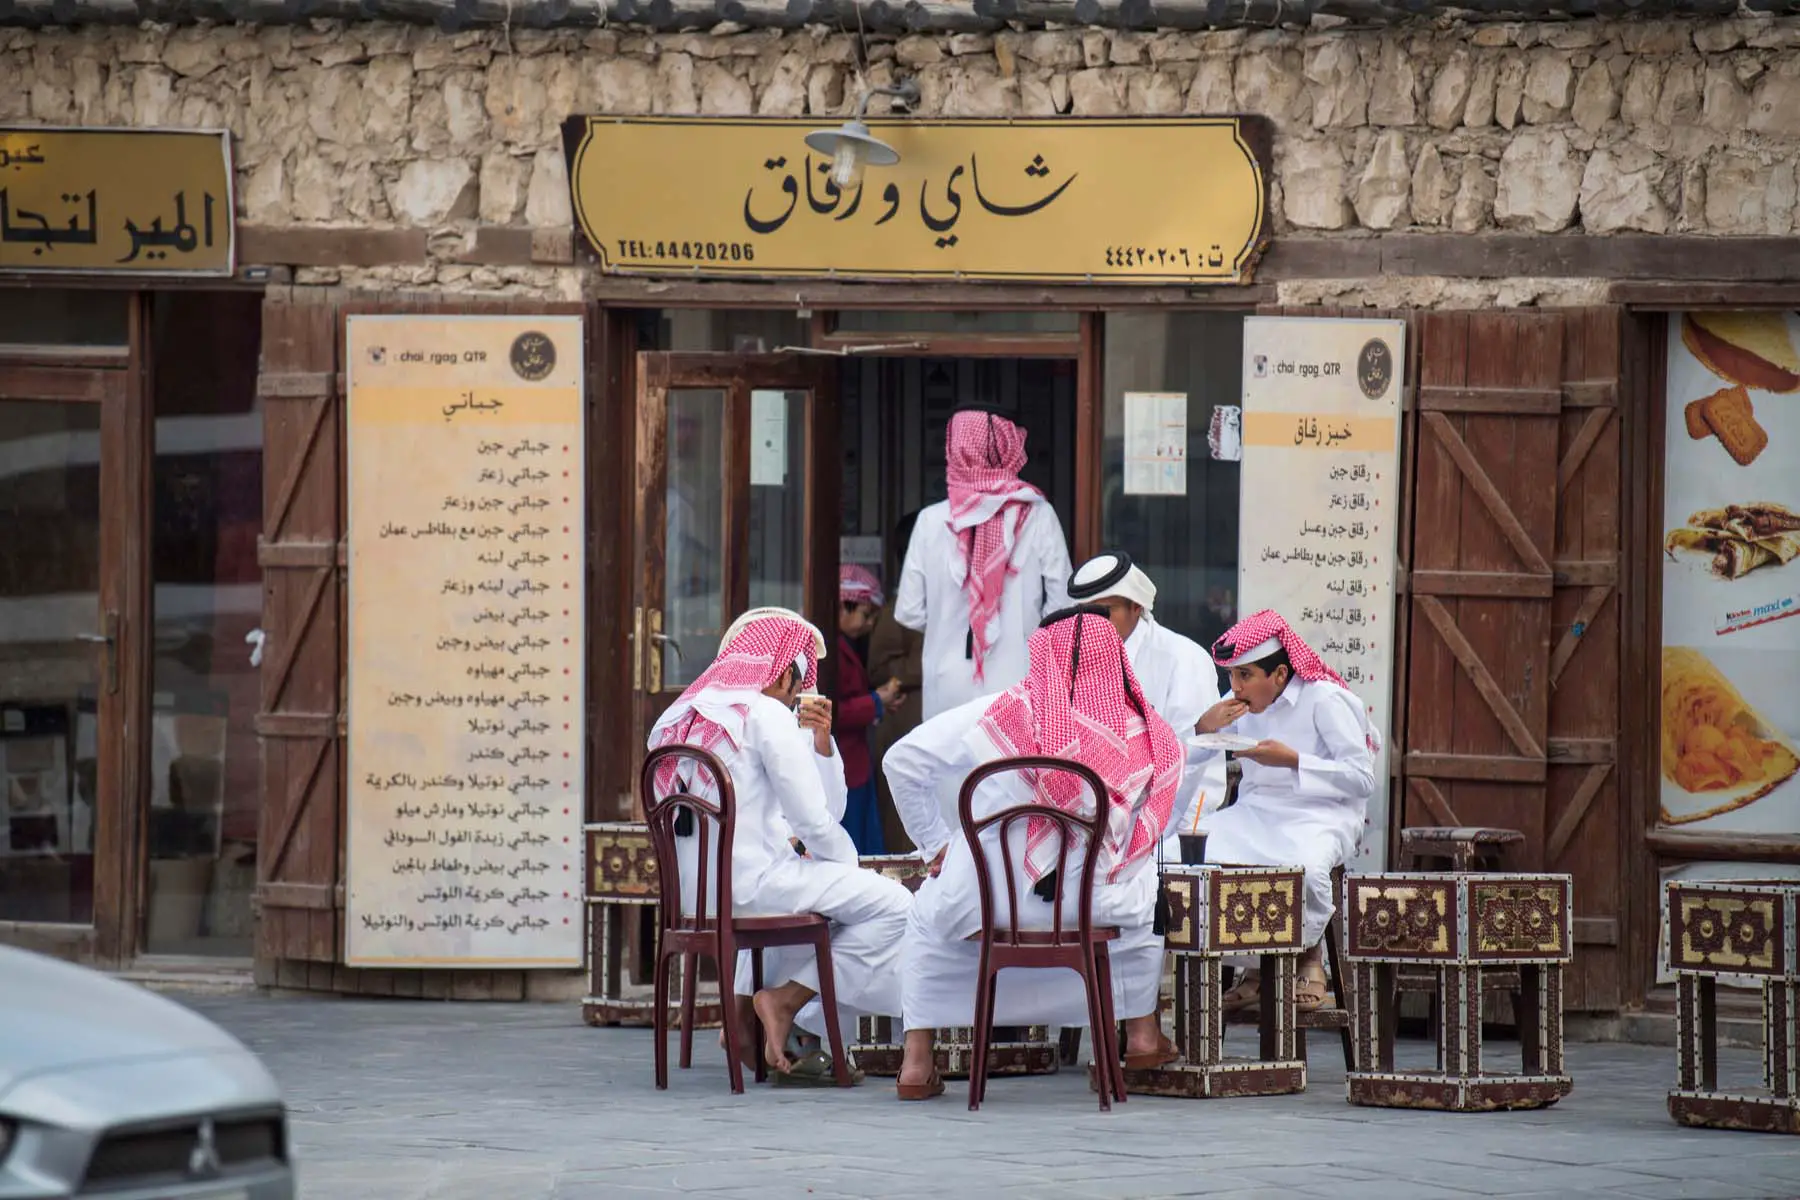 cafe in qatar busy with local men talking